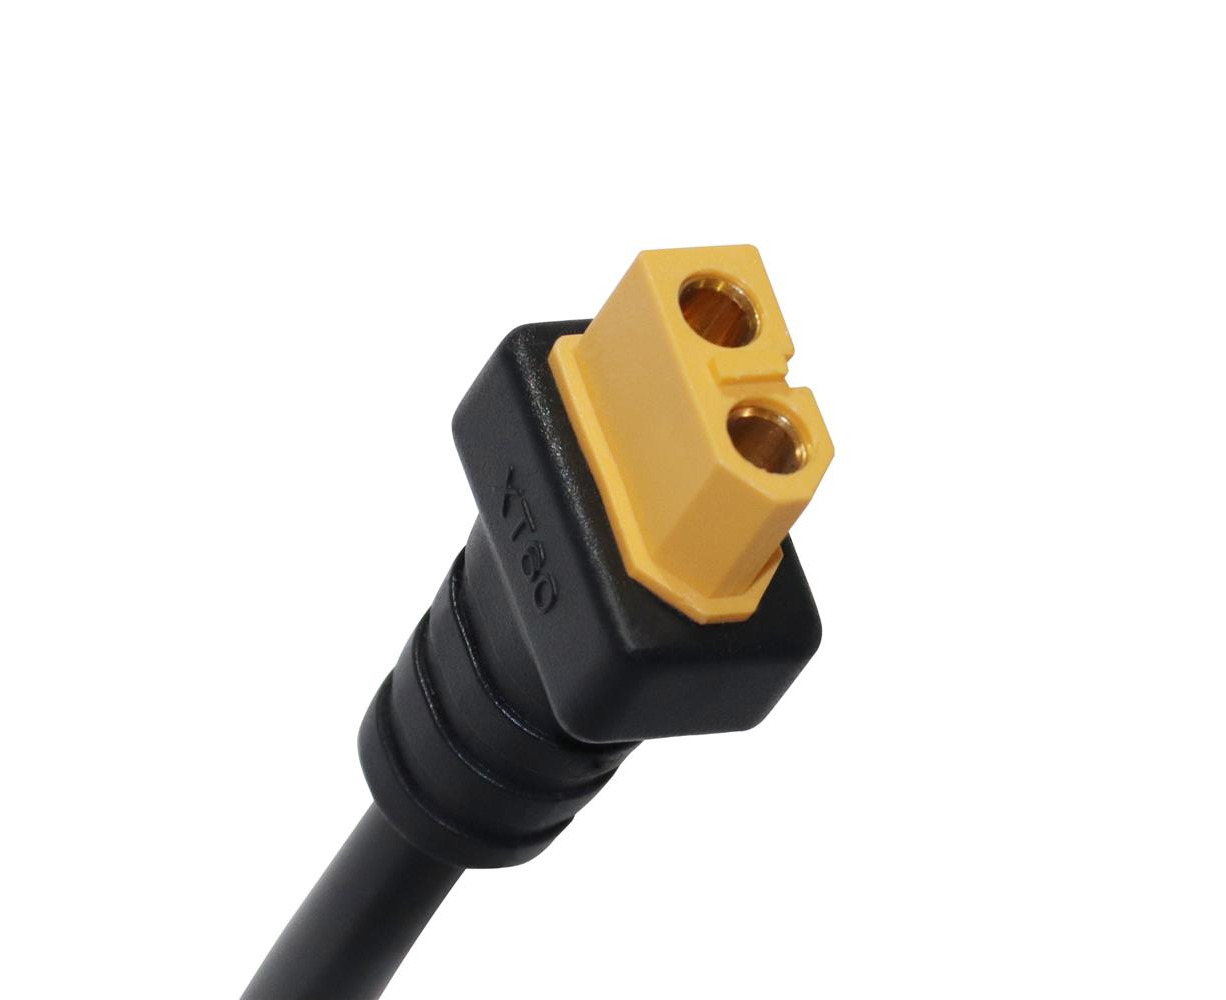 Cable MC4 to DC6530 (Male) adaptor